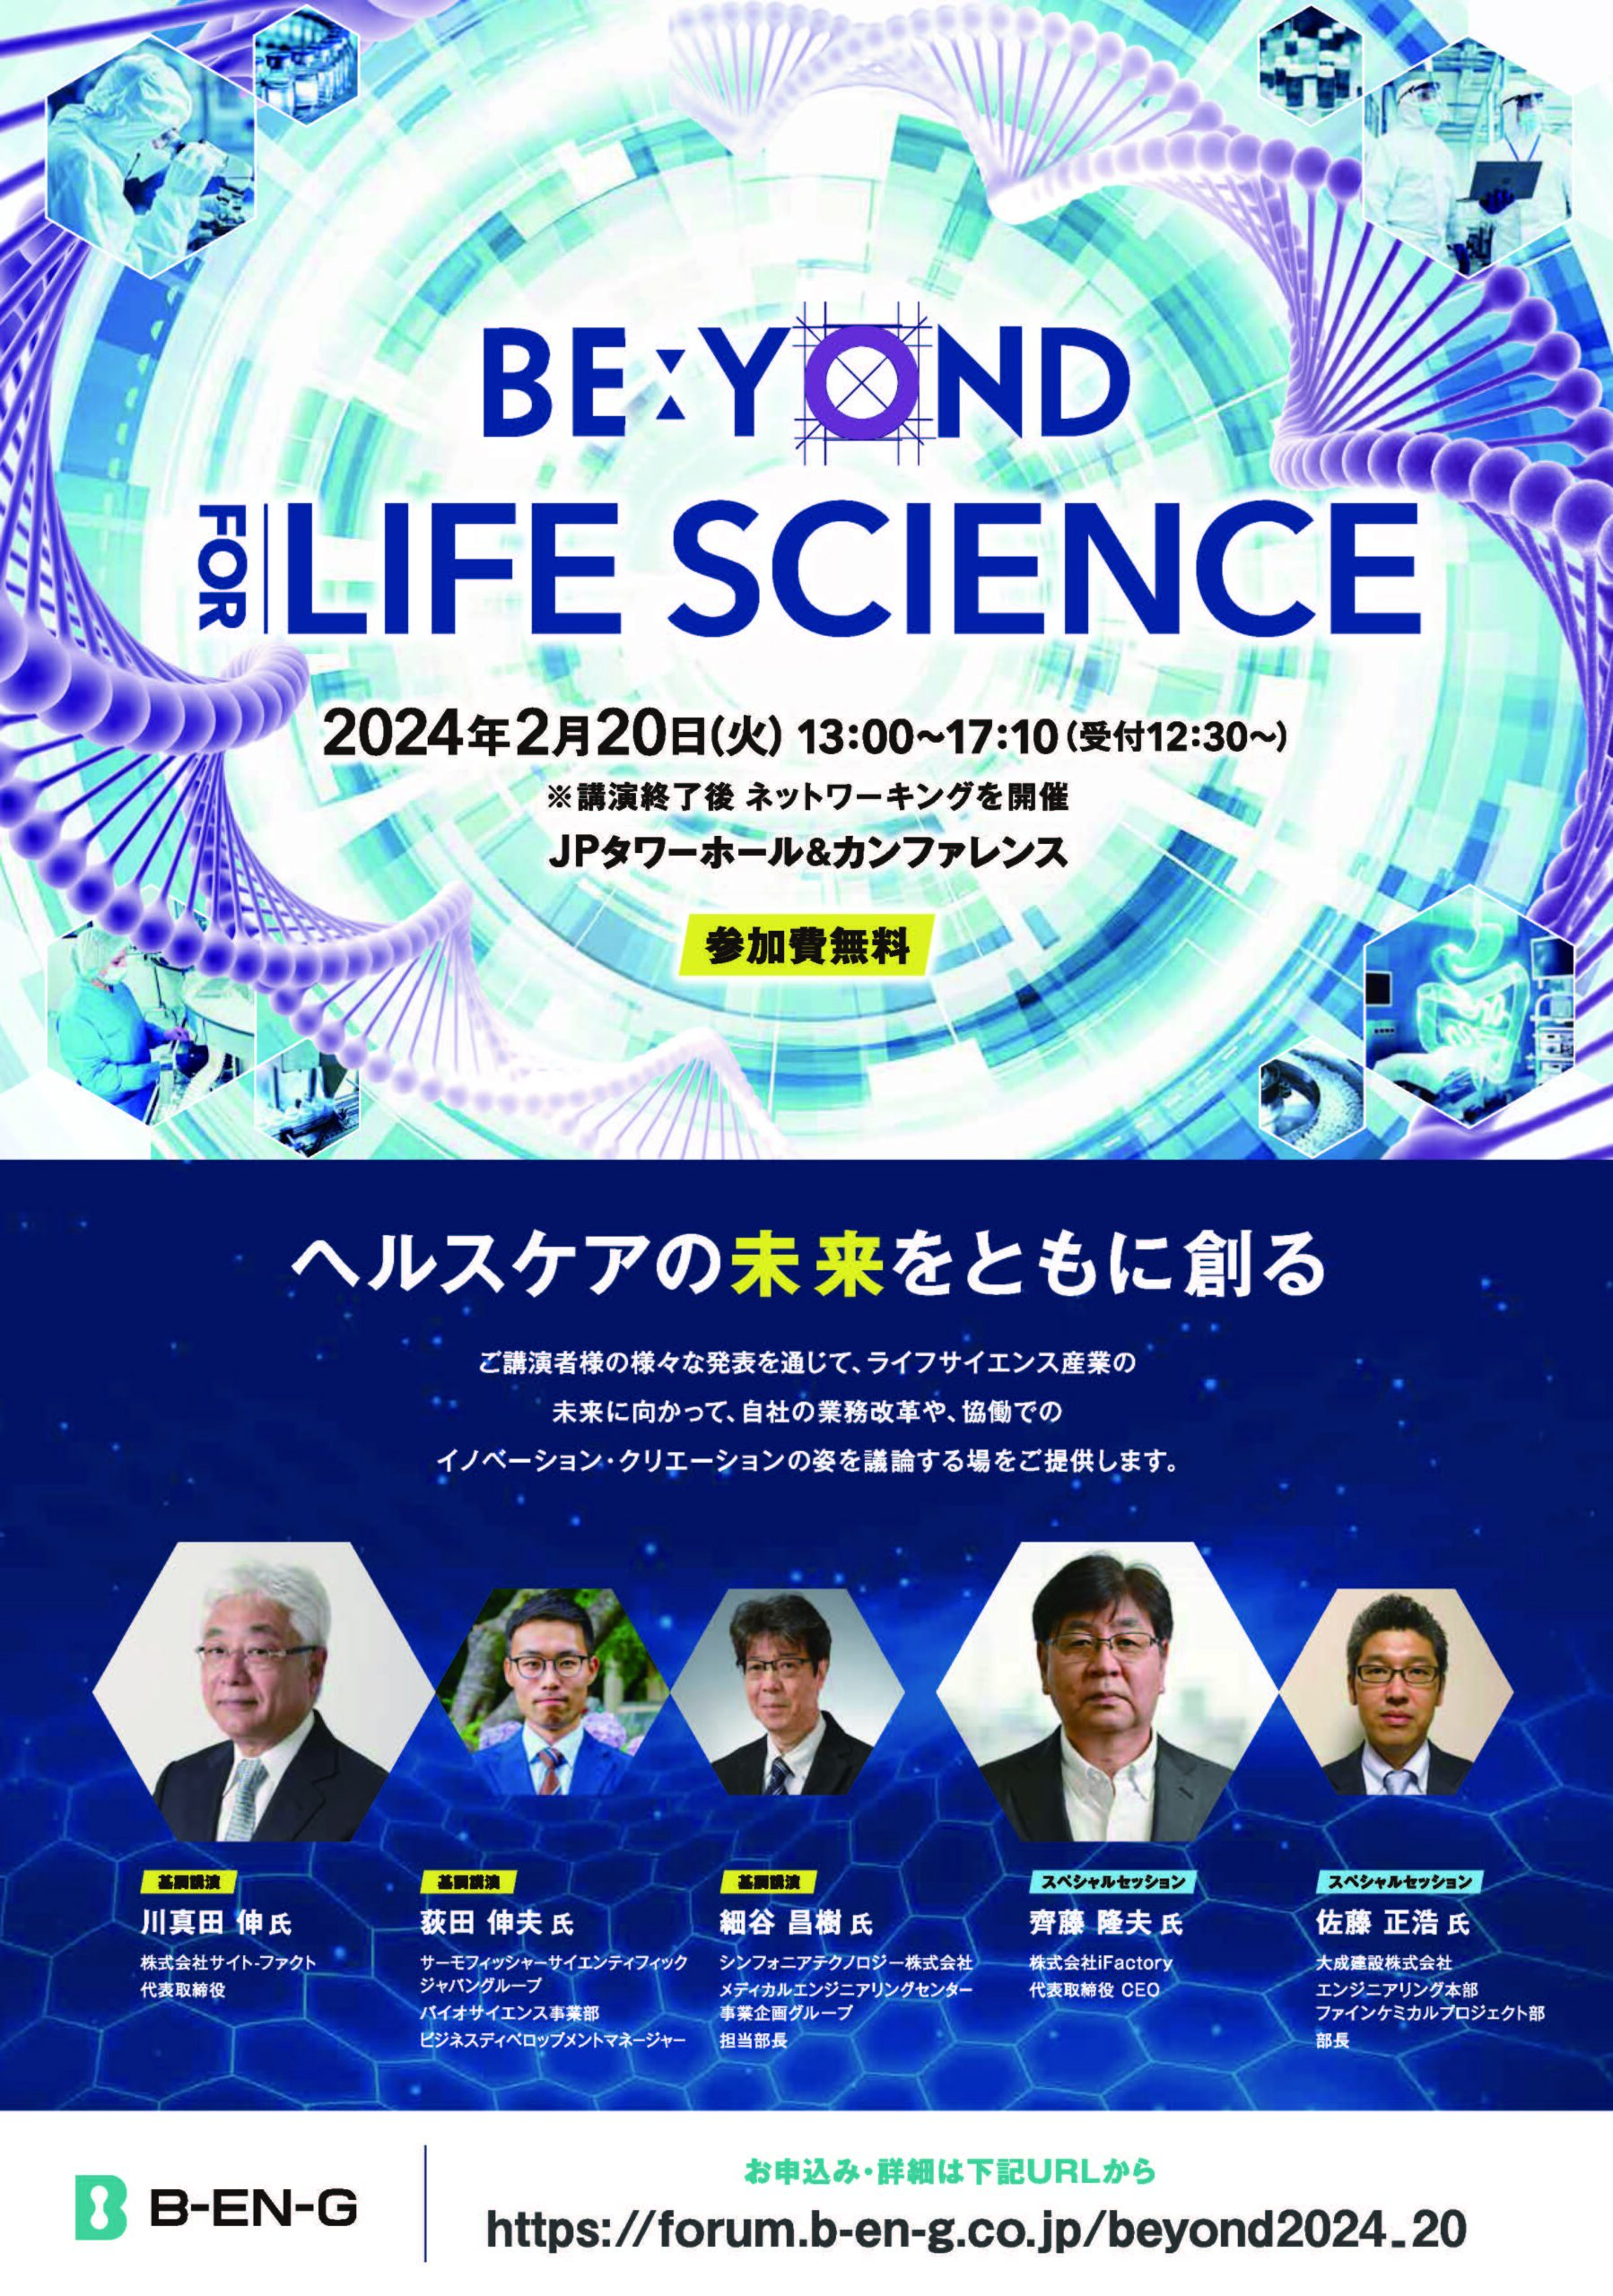 BEYOND-FOR-LIFESCIENCEご案内_1